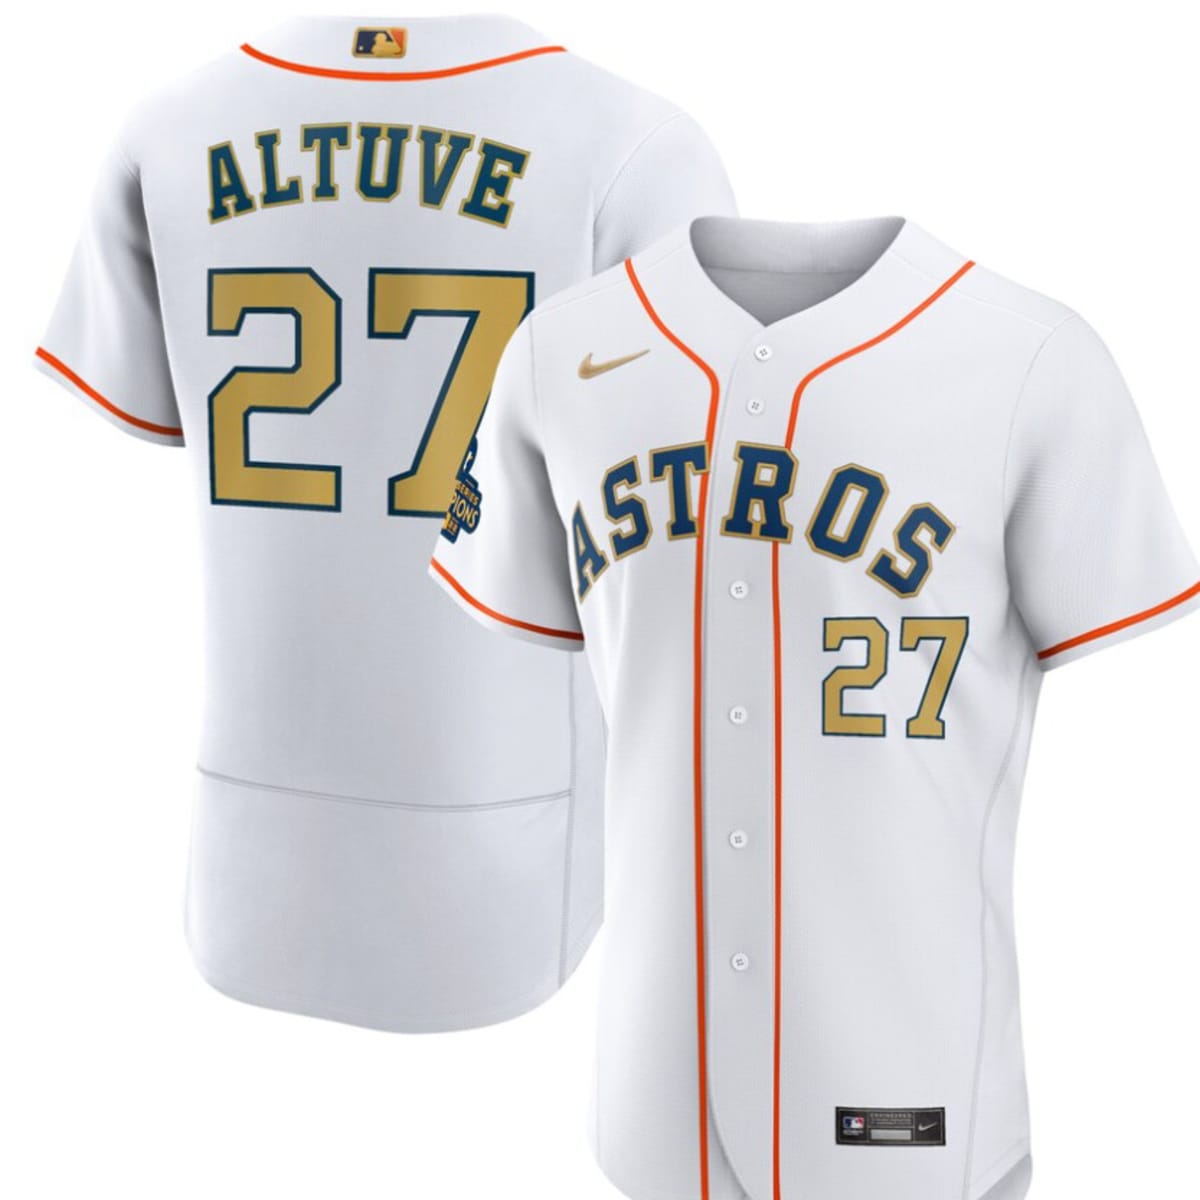 Astros unveil limited edition 'Gold Rush' World Series merchandise - here's  what included